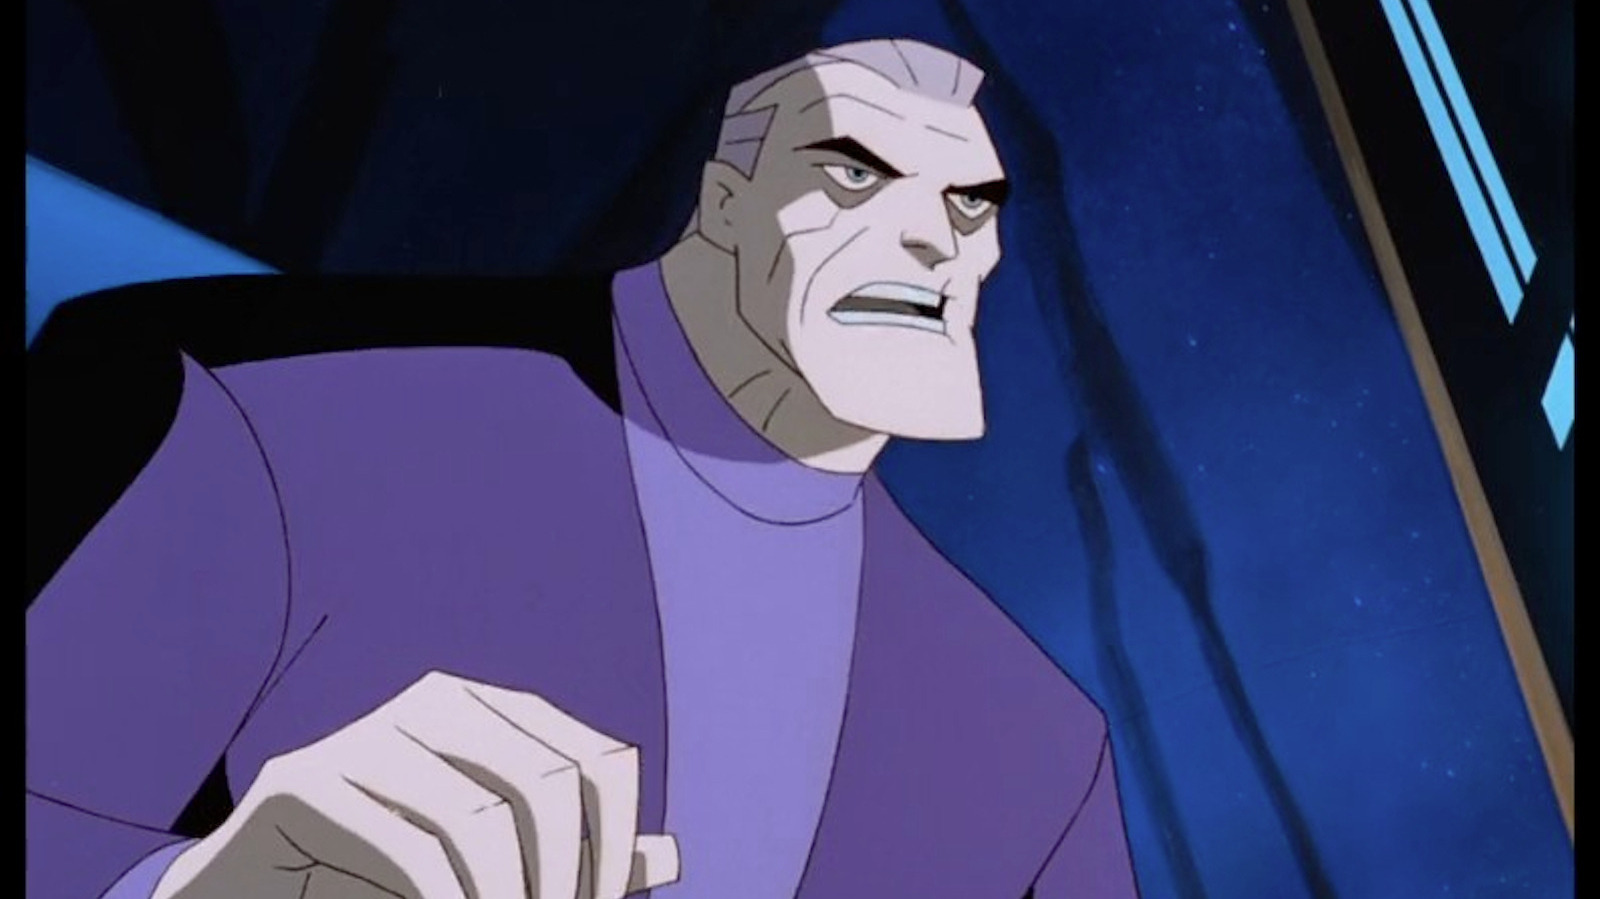 Including Old Bruce Wayne In Batman Beyond Caused A Major Writing Problem